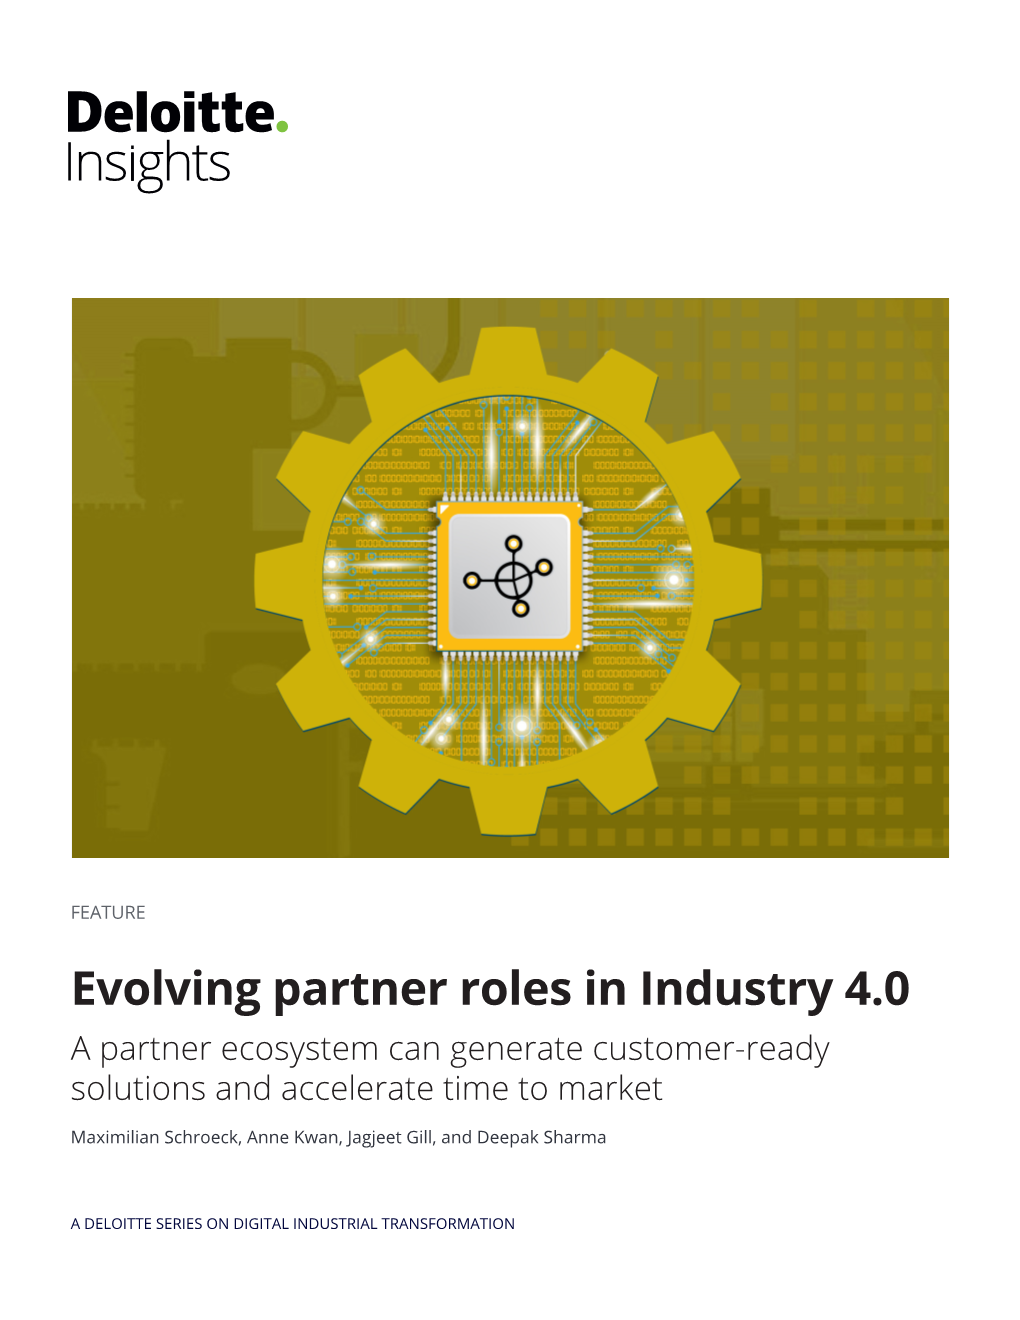 Evolving Partner Roles in Industry 4.0 a Partner Ecosystem Can Generate Customer-Ready Solutions and Accelerate Time to Market